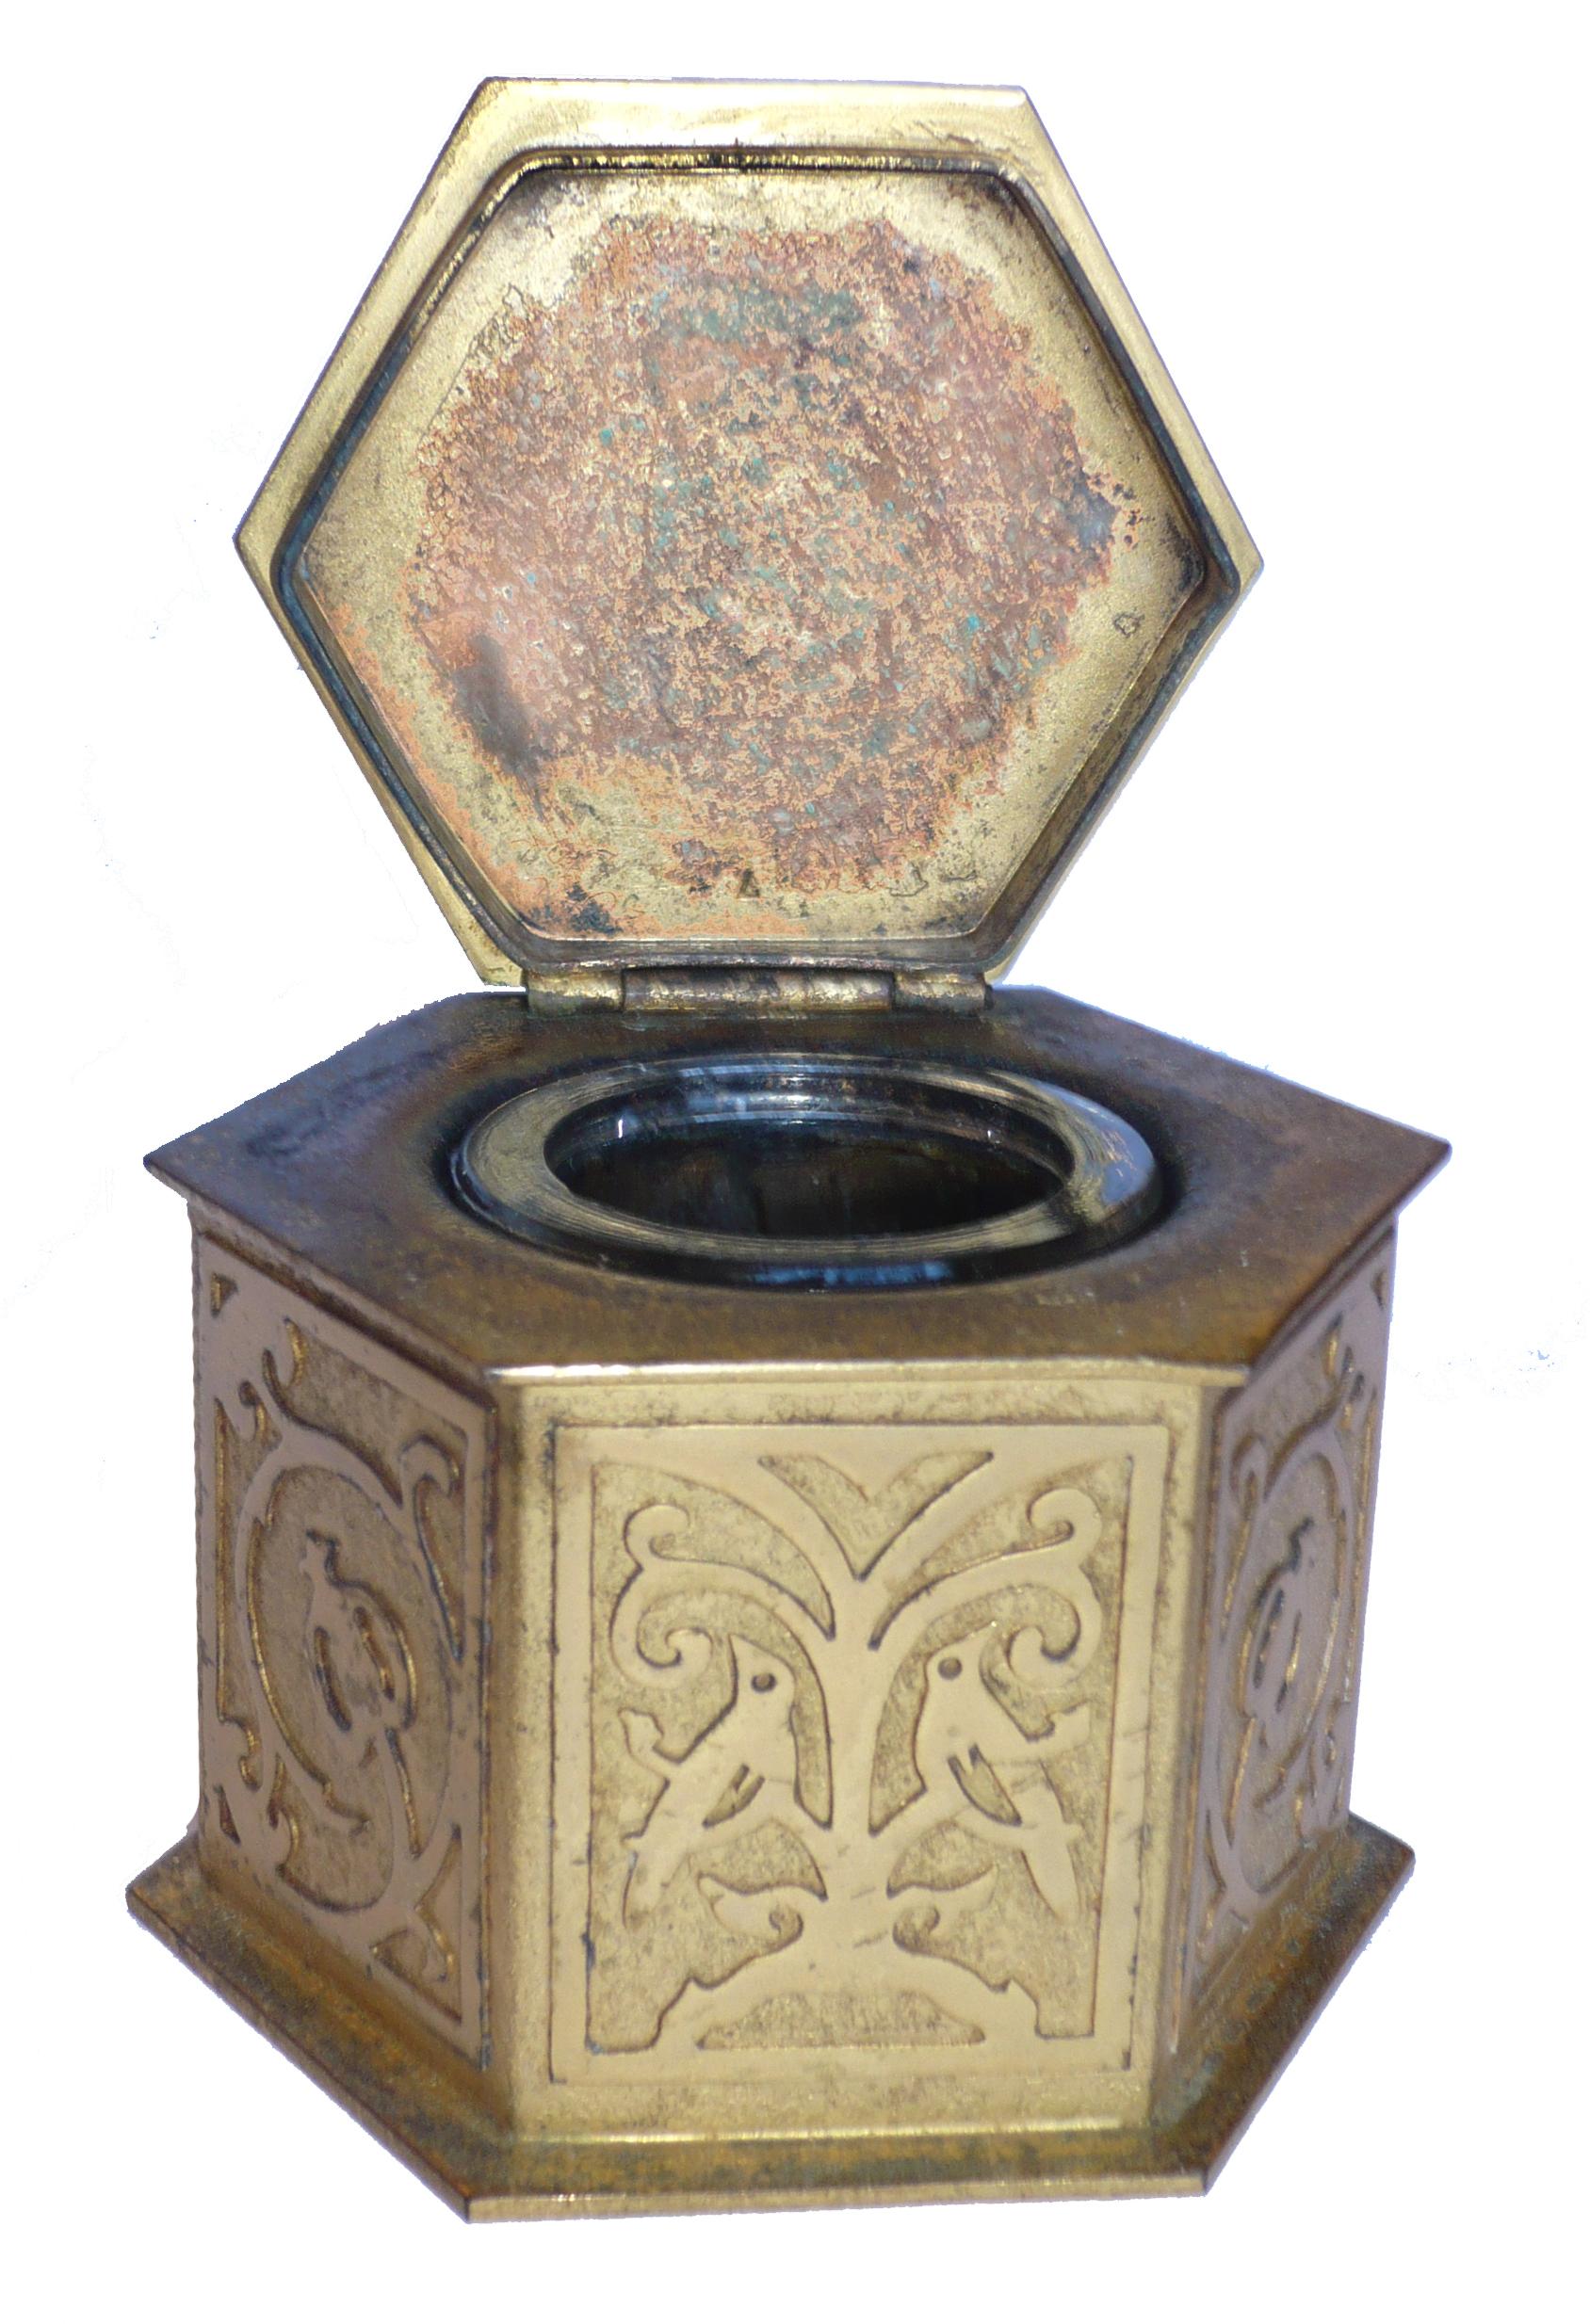 Gold encrusted bronze ink well, circa 1920, Silver Crest line #2202. Smith Metal Arts was founded in Buffalo, NY in 1889 by German immigrant and metal and leather goods craftsman Otto Heinz, as the Heinz Art Metal Company, who began as a